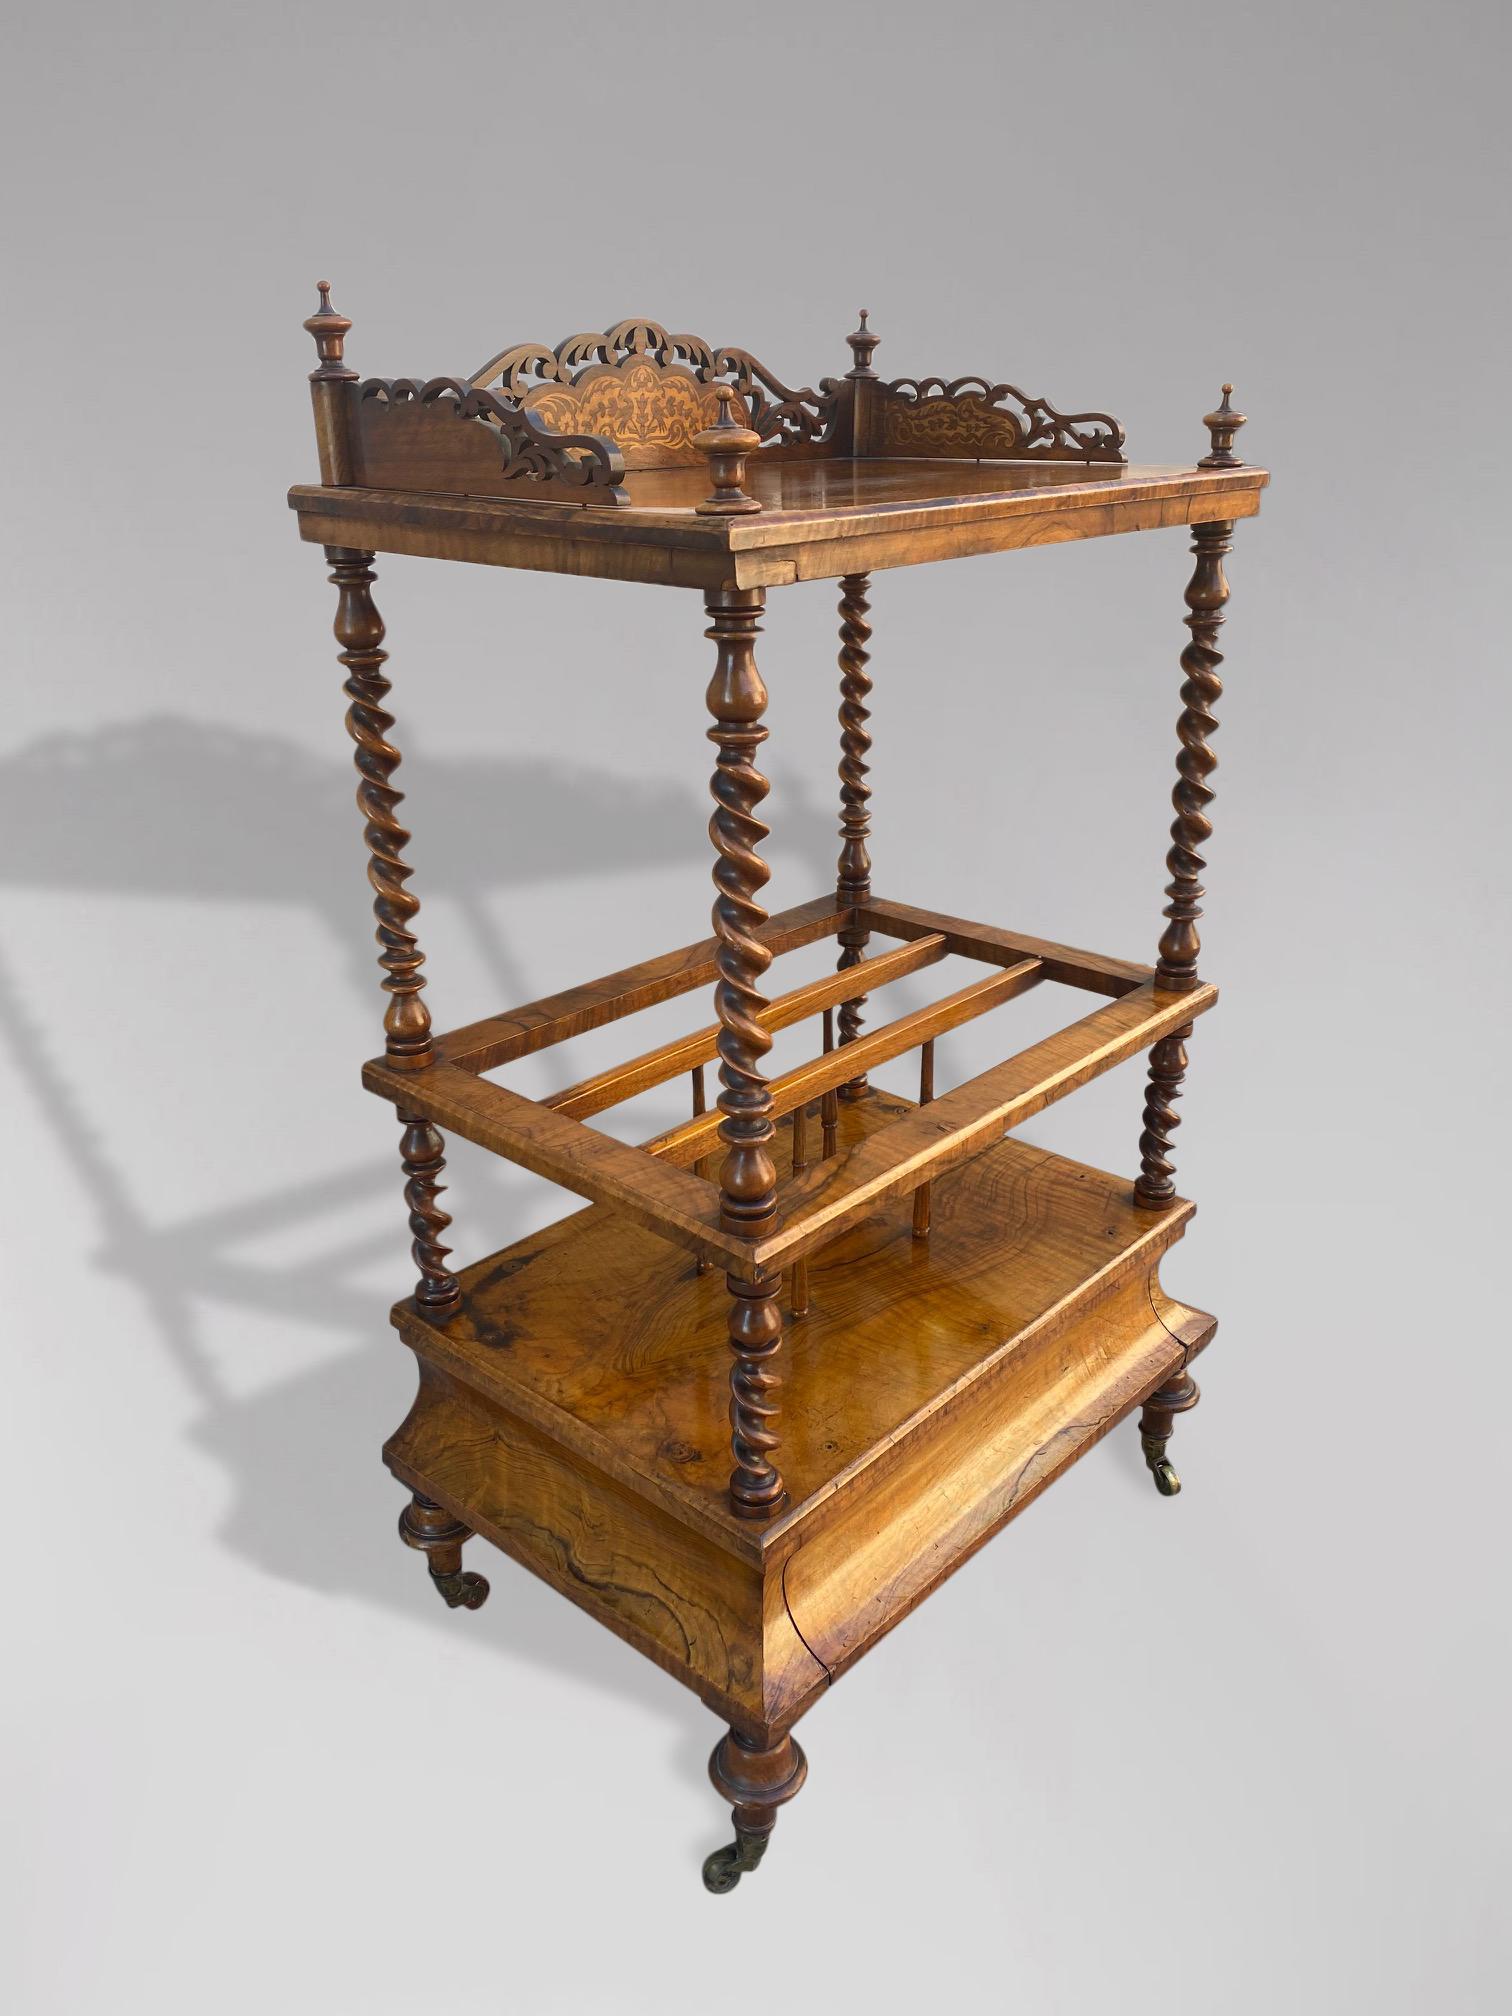 Hand-Crafted 19th Century Early Victorian Period Walnut Canterbury Whatnot Music Stand For Sale